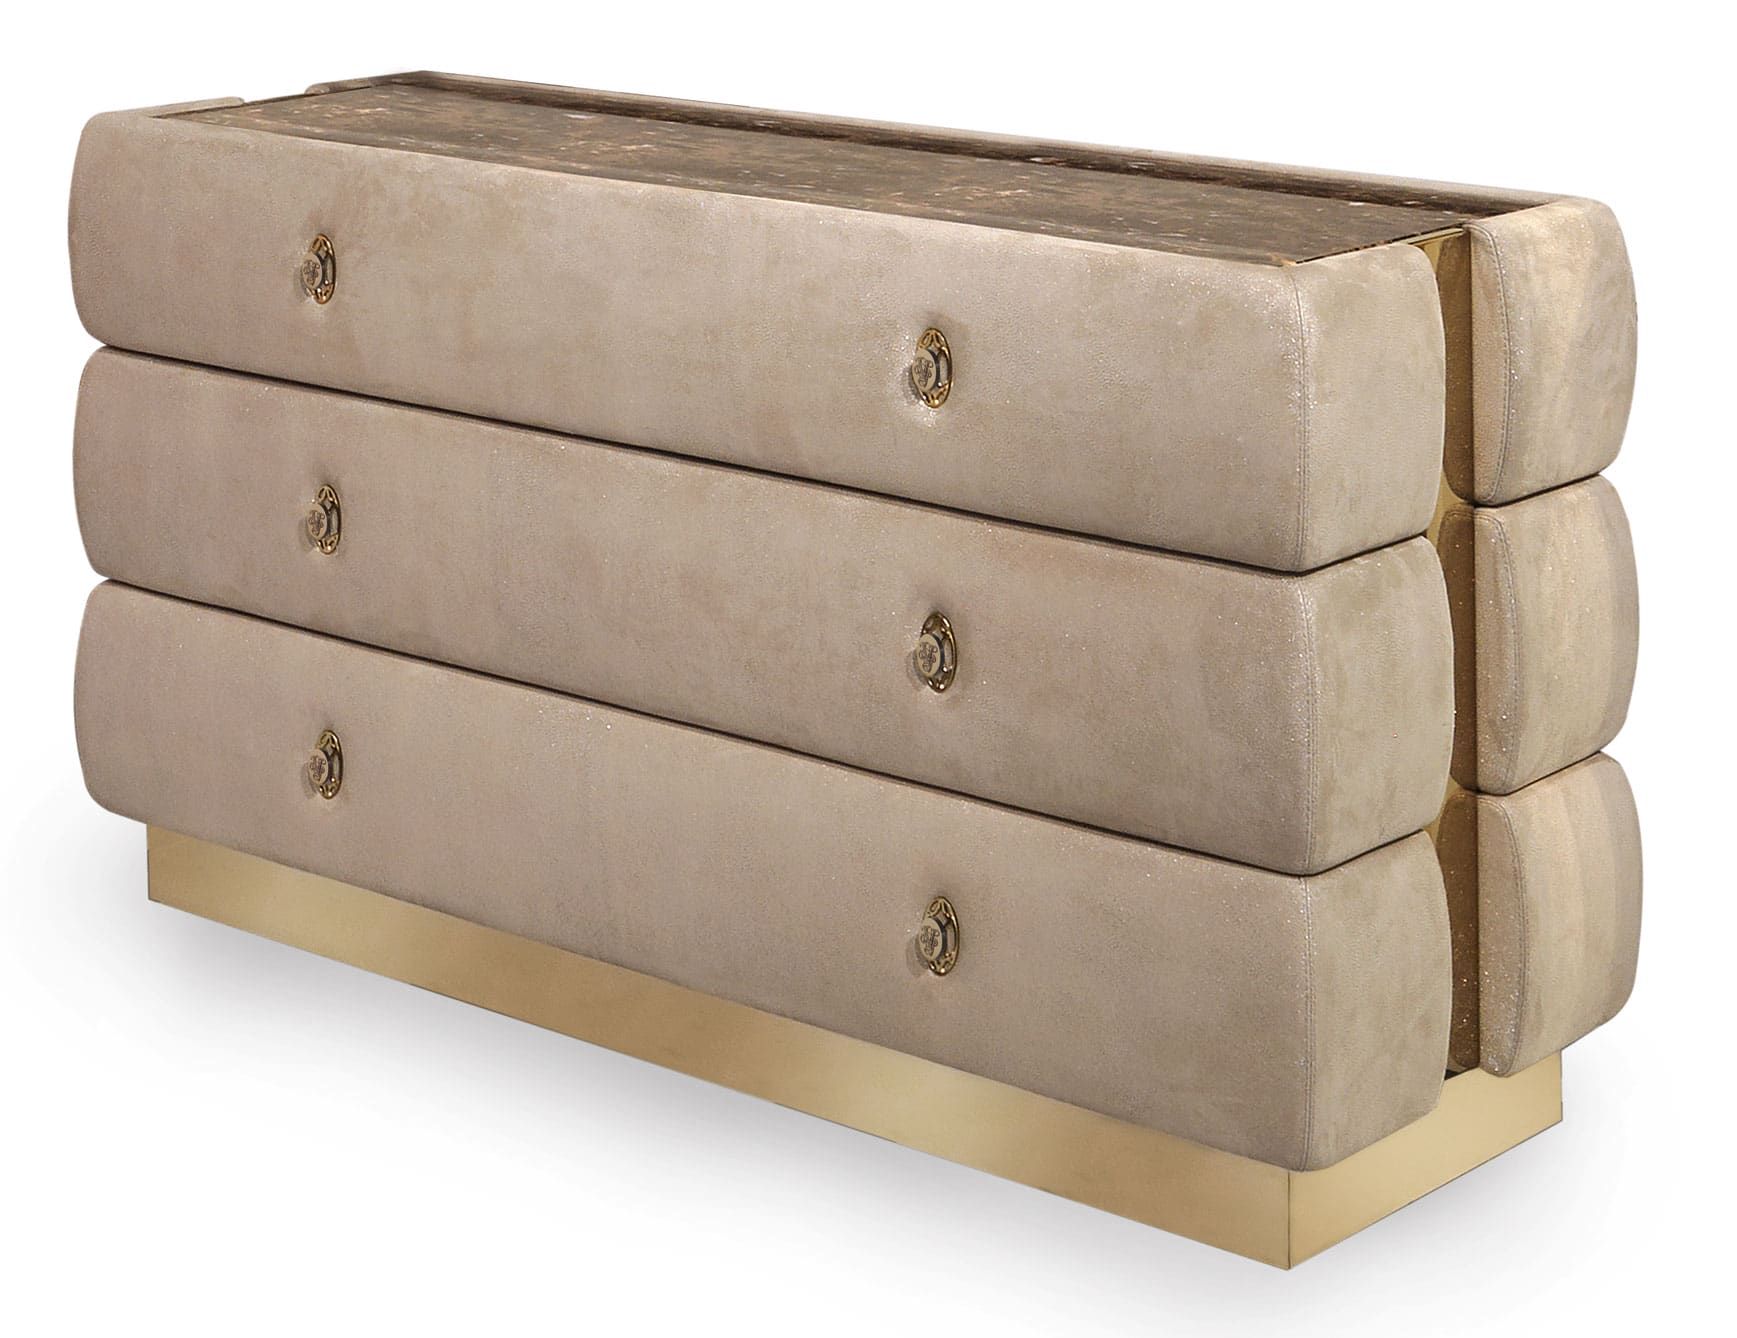 Perkins modern luxury chest of drawers with beige leather